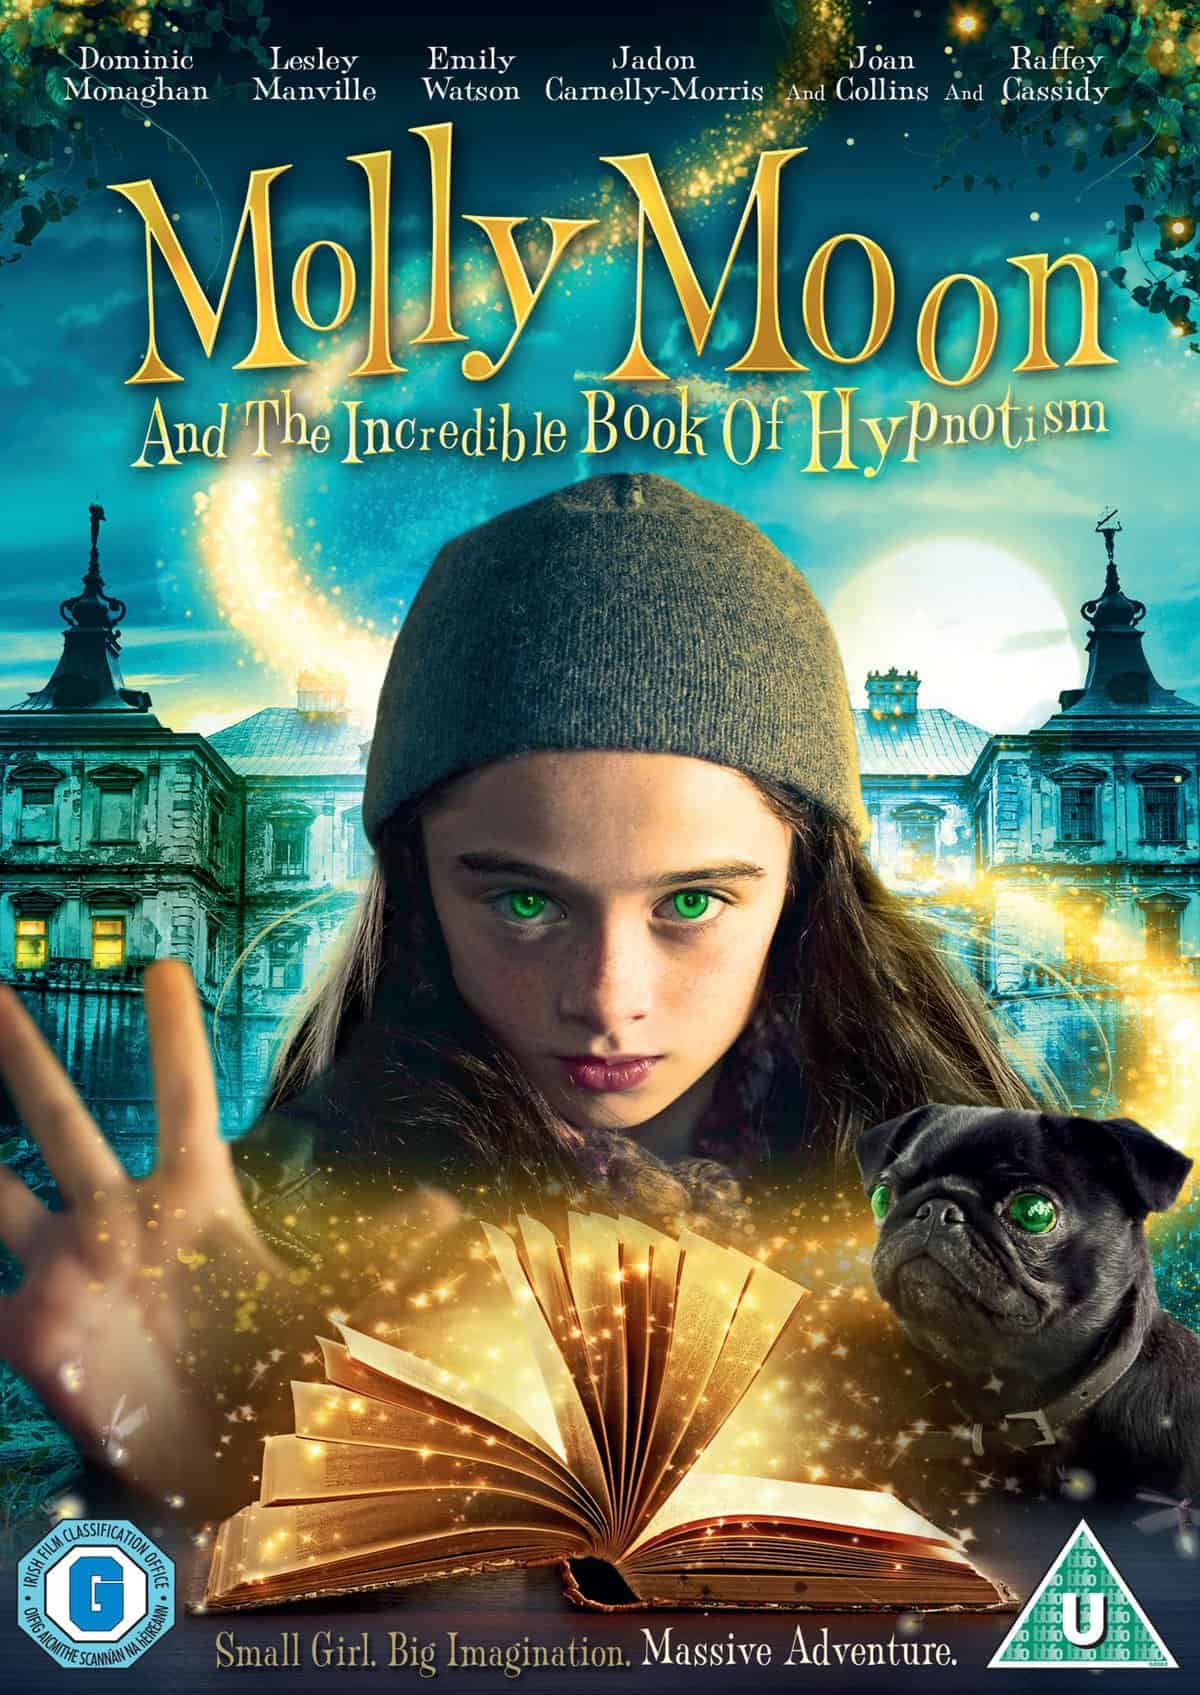 Watch The Trailer For Molly Moon And The Incredible Book Of Hypnotism Fun Kids The UK s